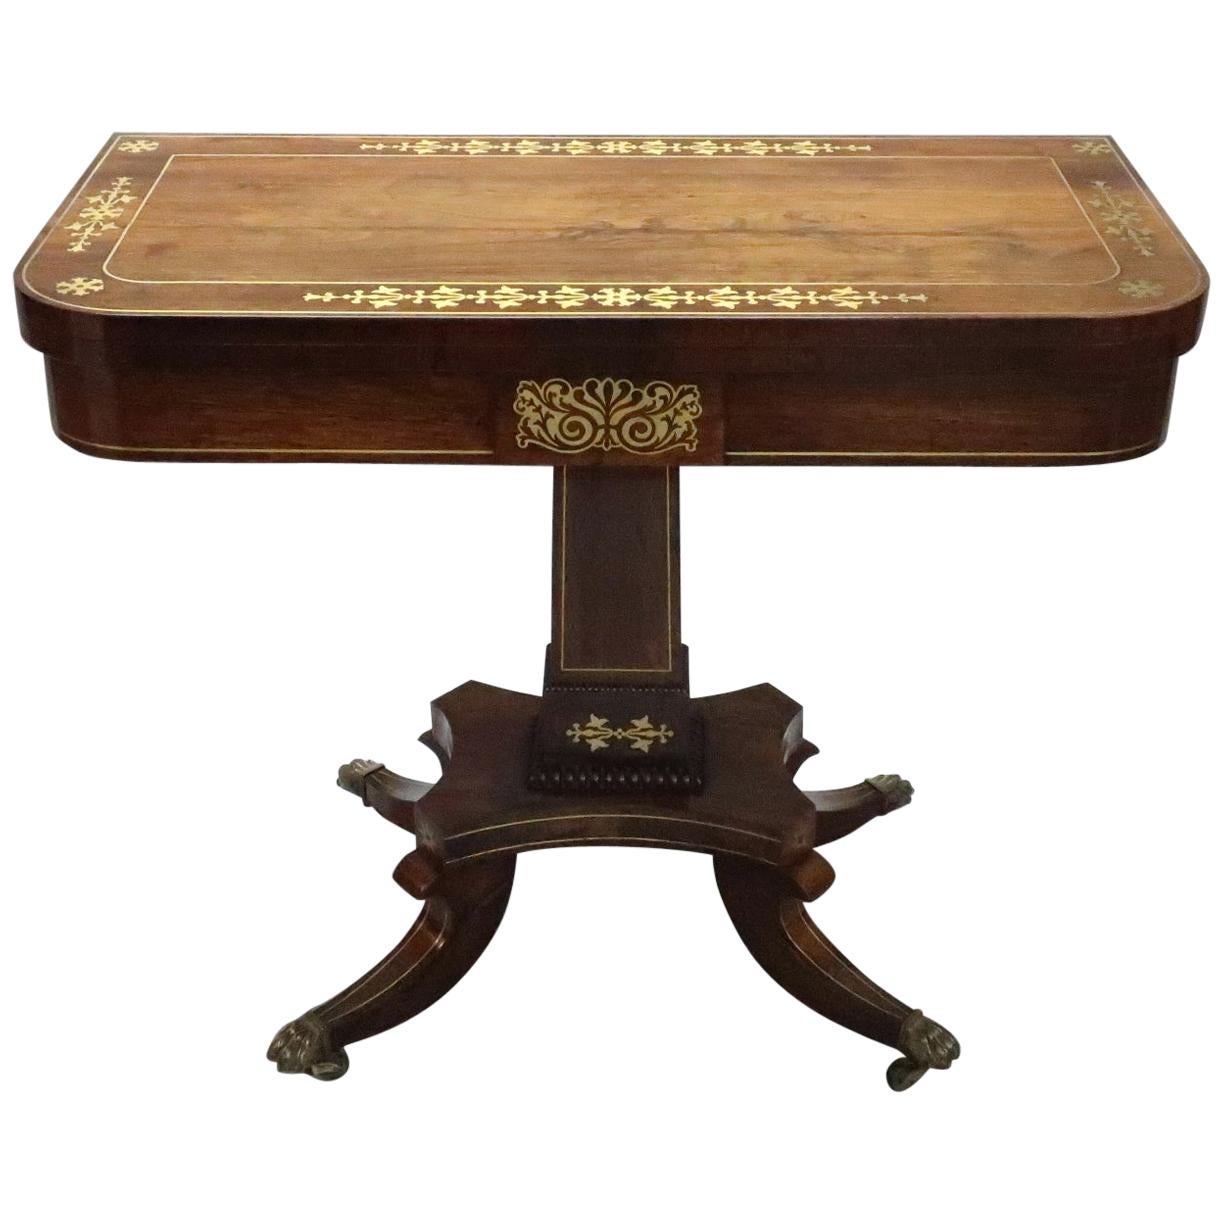 English Regency Rosewood and Brass Inlaid Side Table Attributed to John Mclean For Sale